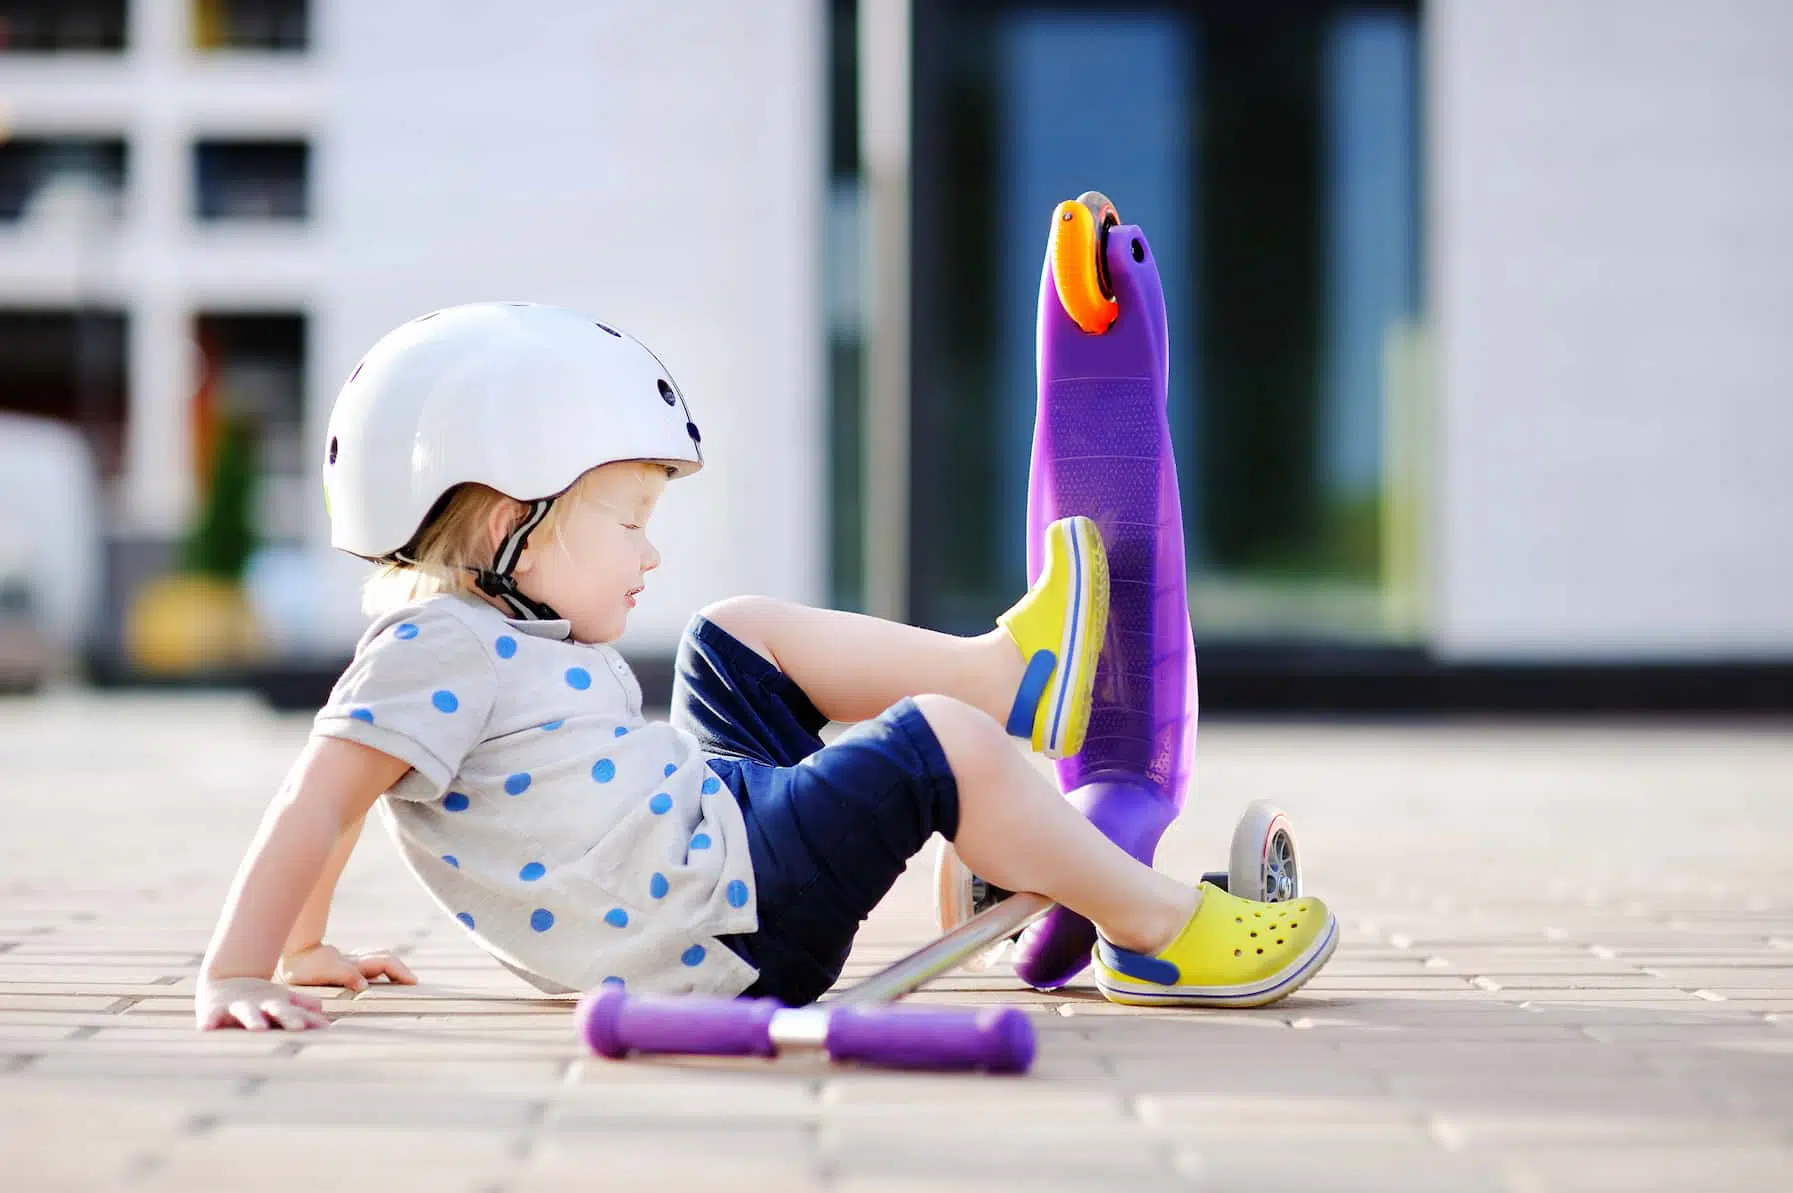 Image of a toddler girl who fell riding her scooter but was fortunately wearing a helmet and therefore engaging in Temecula youth injury prevention tactics.